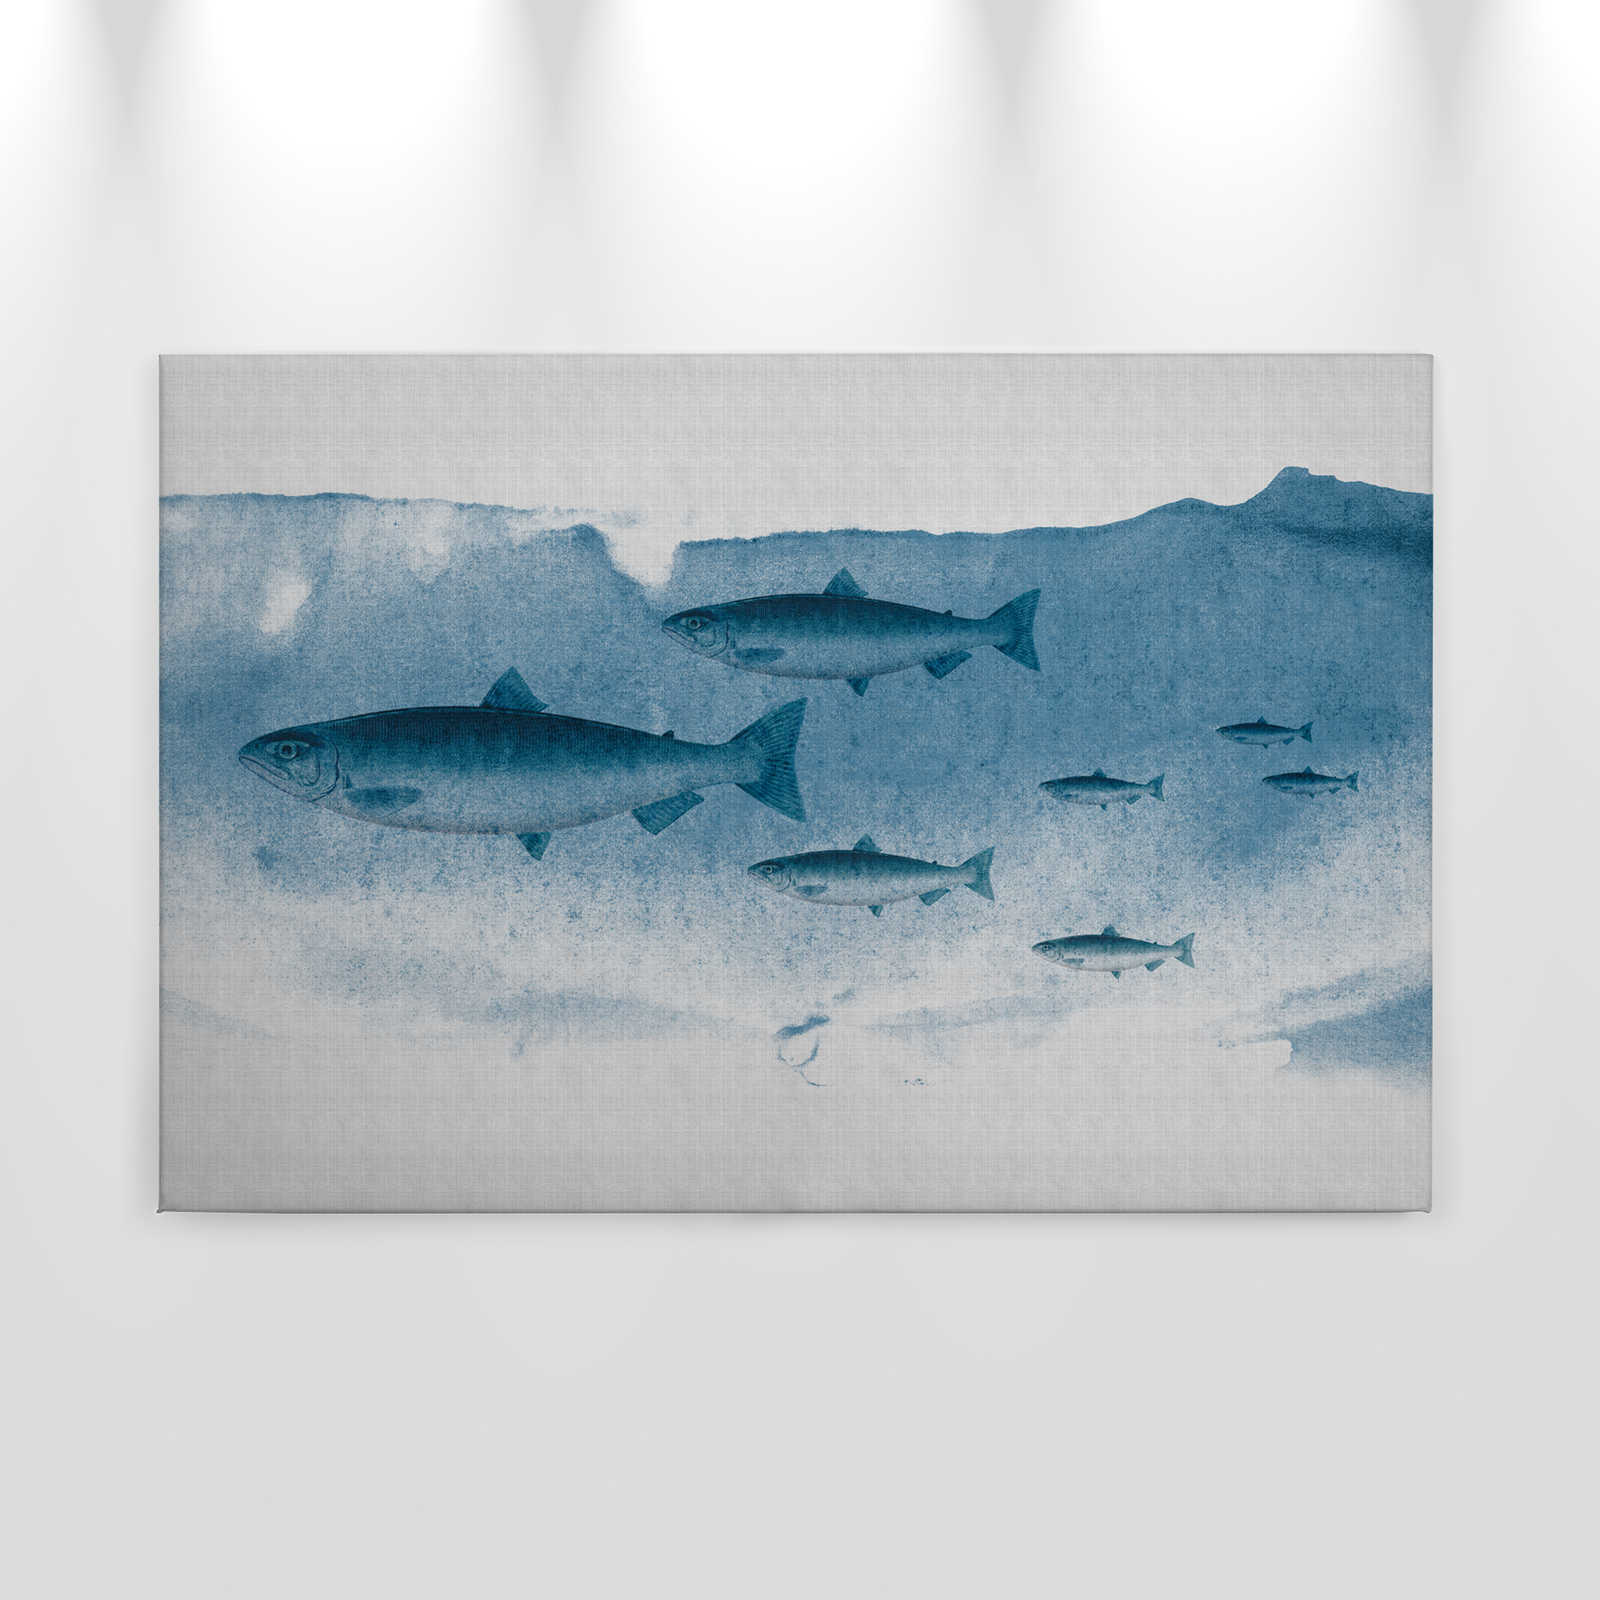             Into the blue 1 - Fish watercolour in blue as canvas picture in natural linen structure - 0.90 m x 0.60 m
        